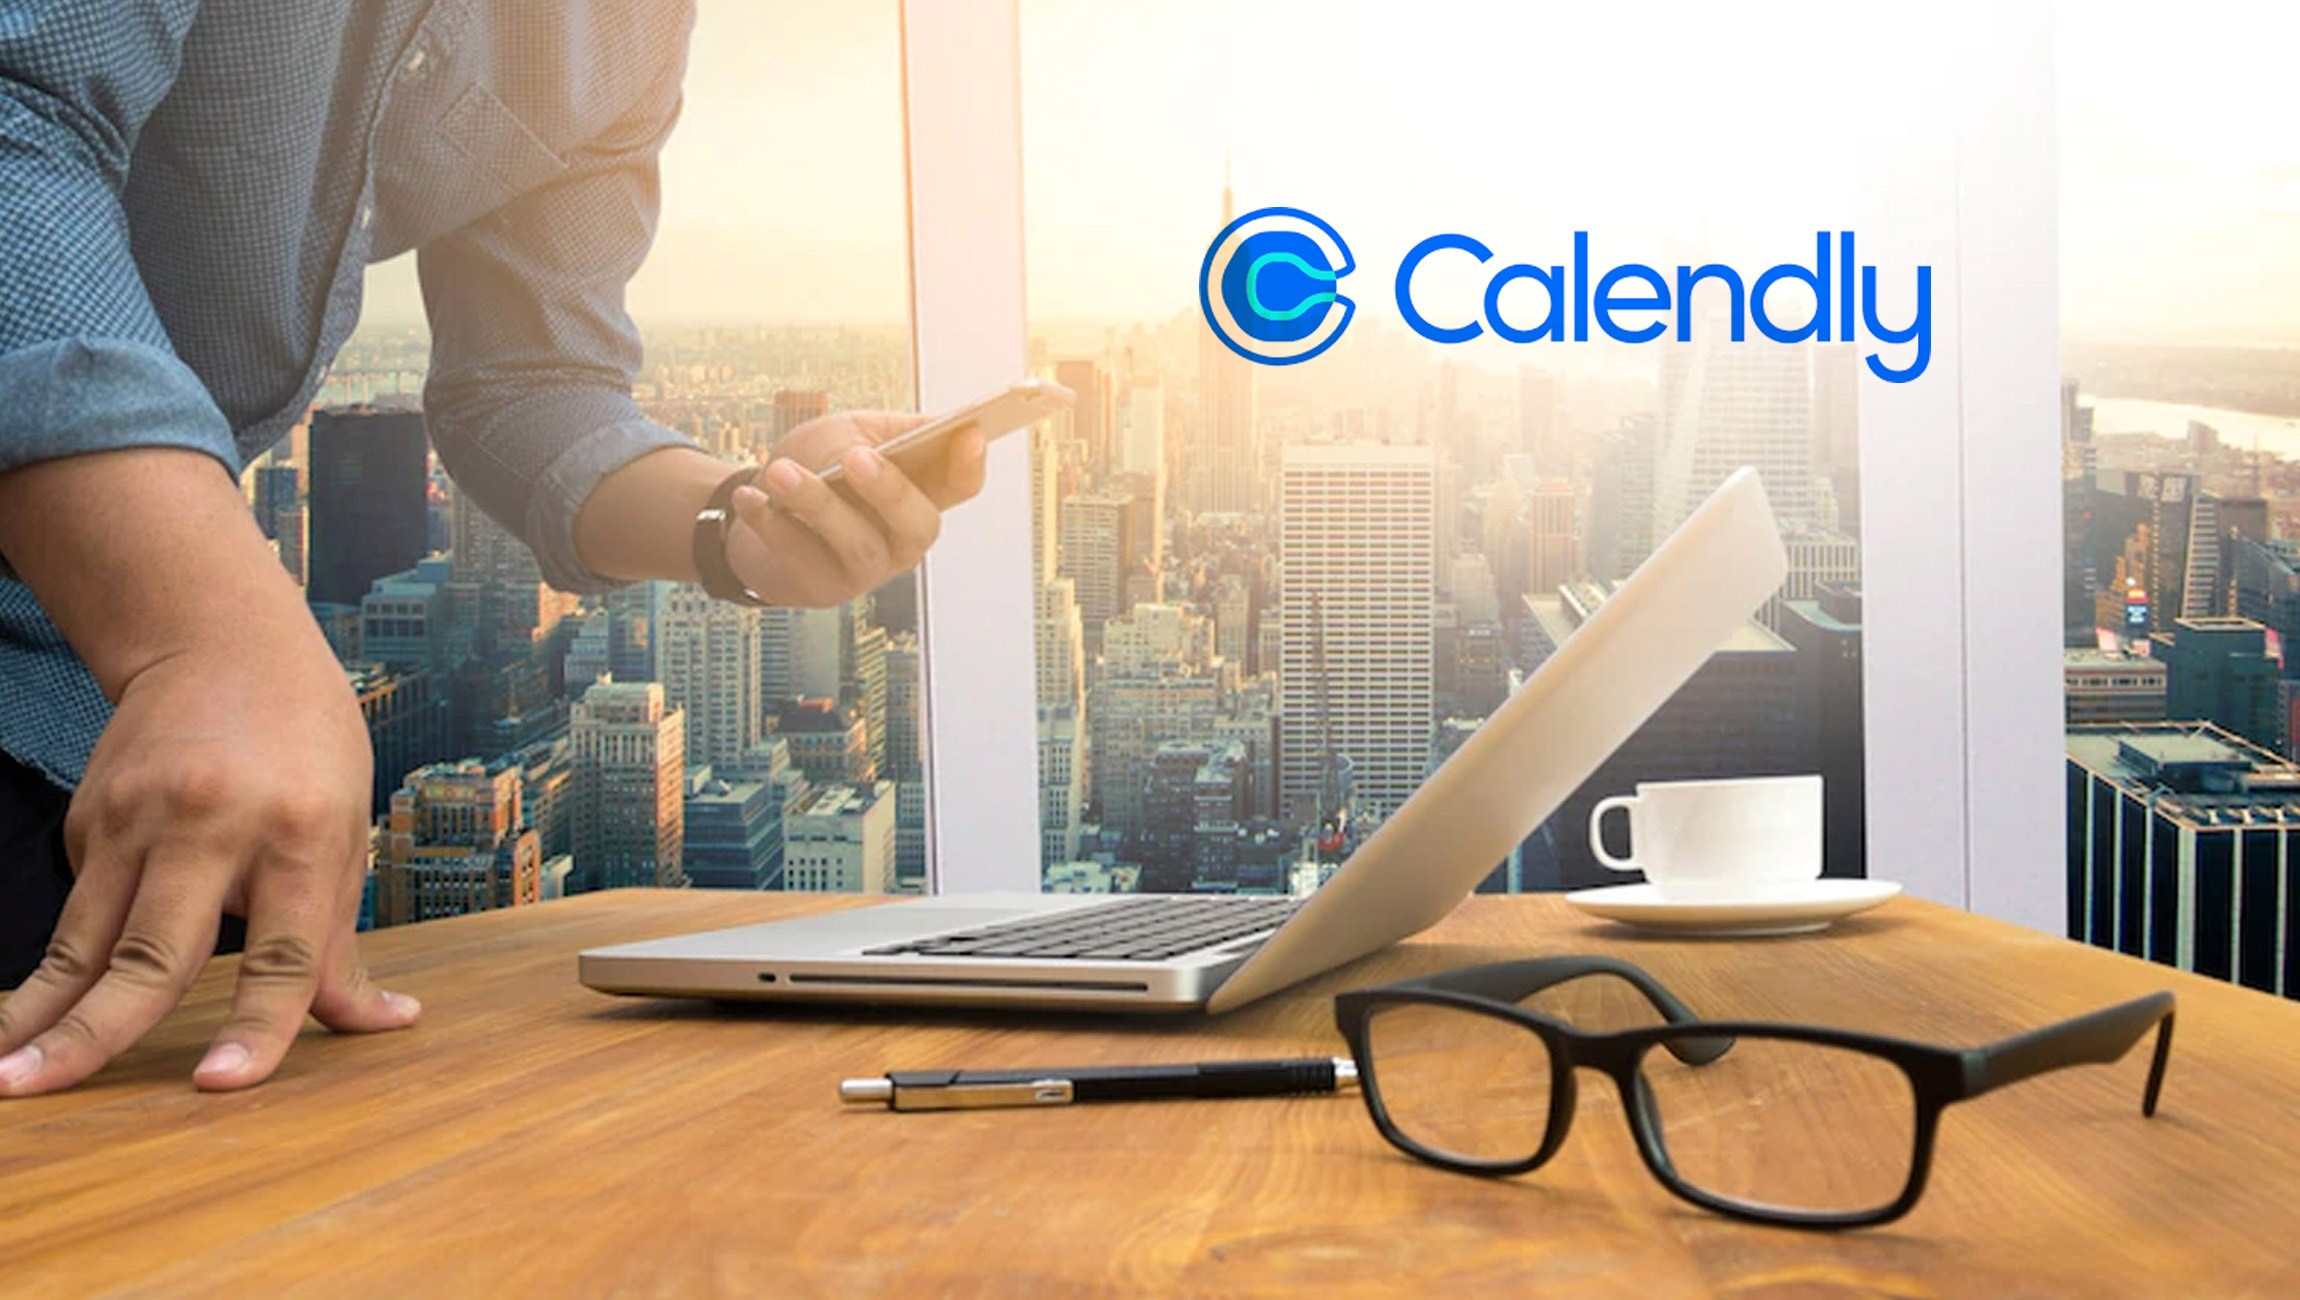 Introducing Calendly Analytics for Teams to Optimize Scheduling and Make Informed Business Decisions